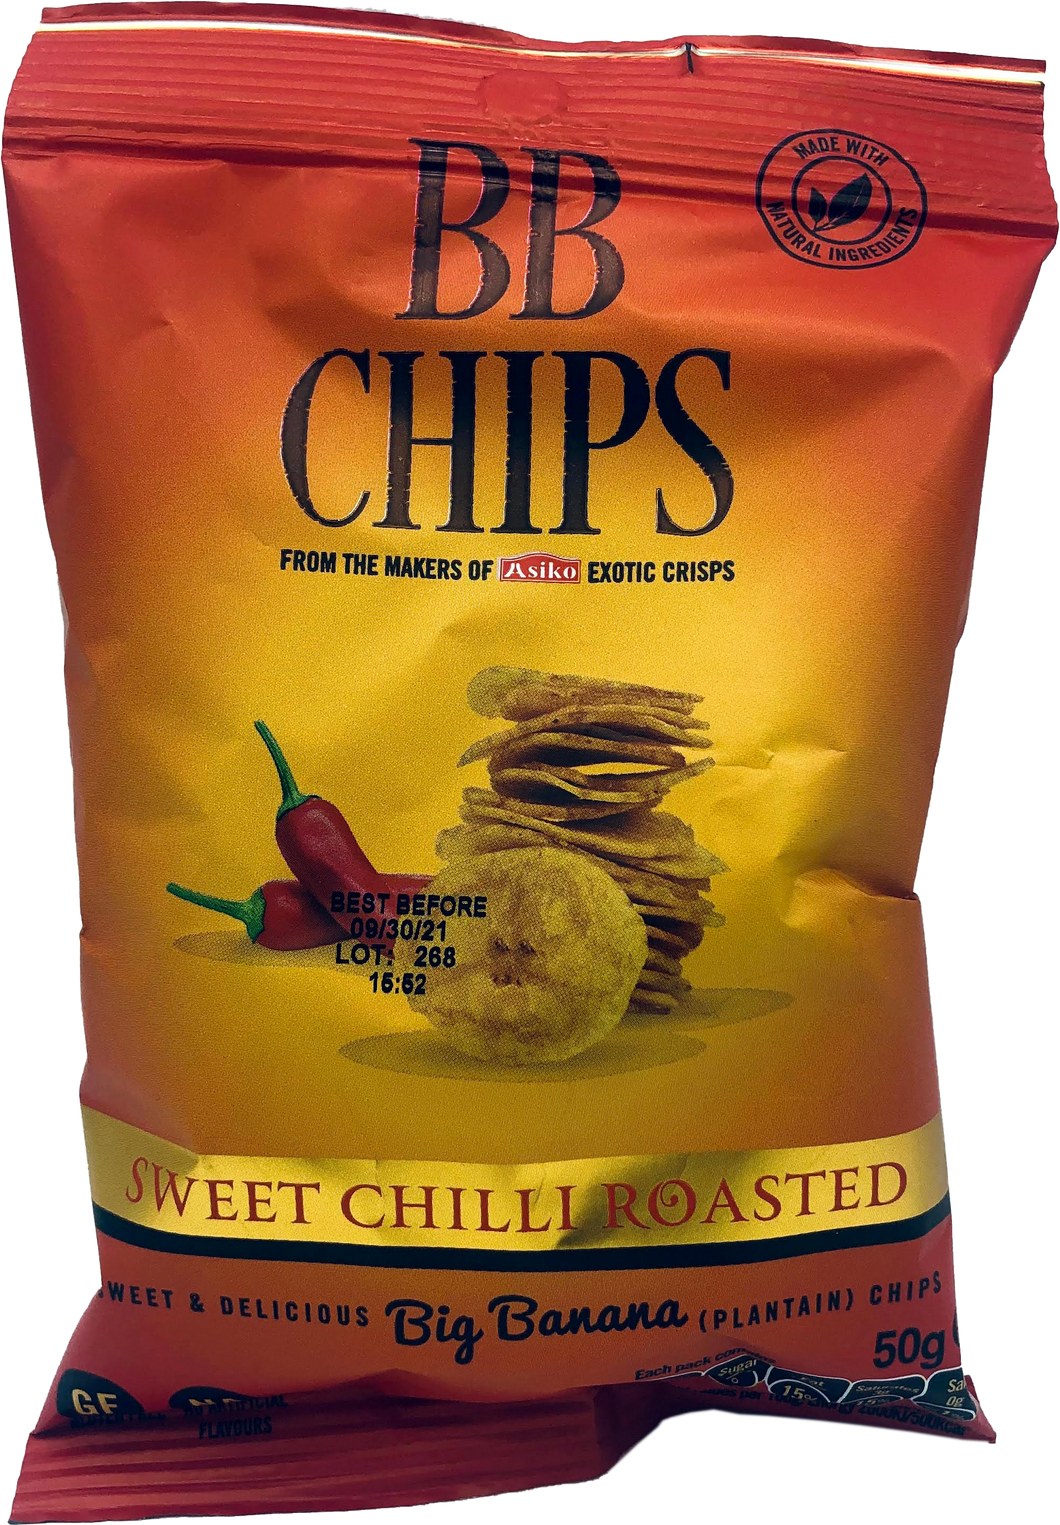 BB Chips Sweet Chilli Roasted